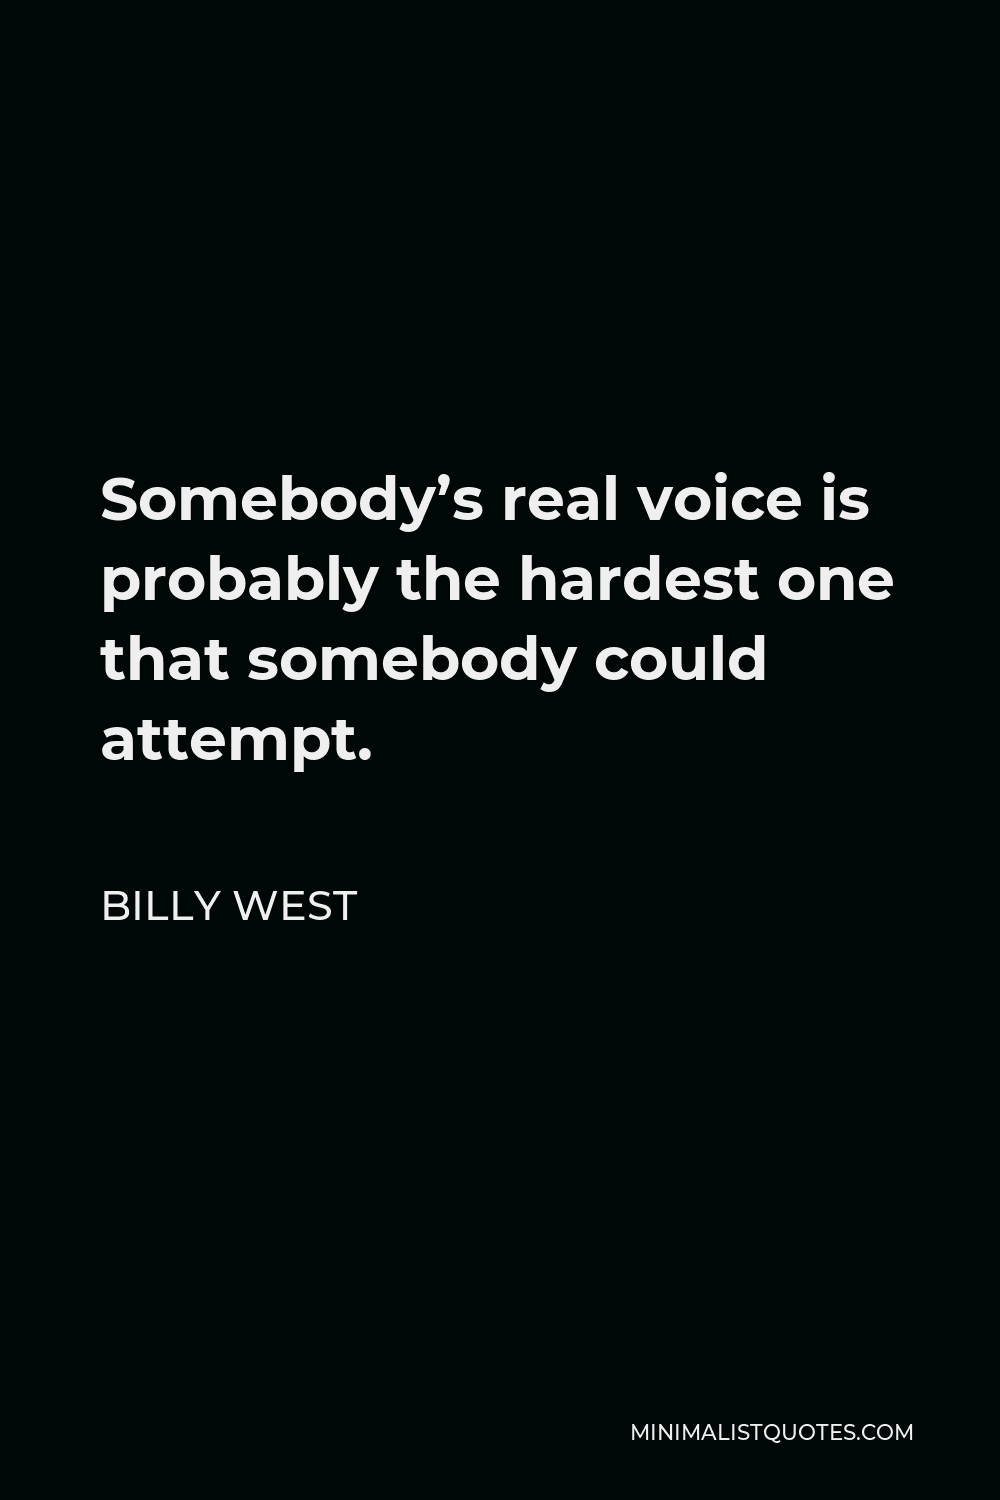 Billy West Quote - Somebody’s real voice is probably the hardest one that somebody could attempt.